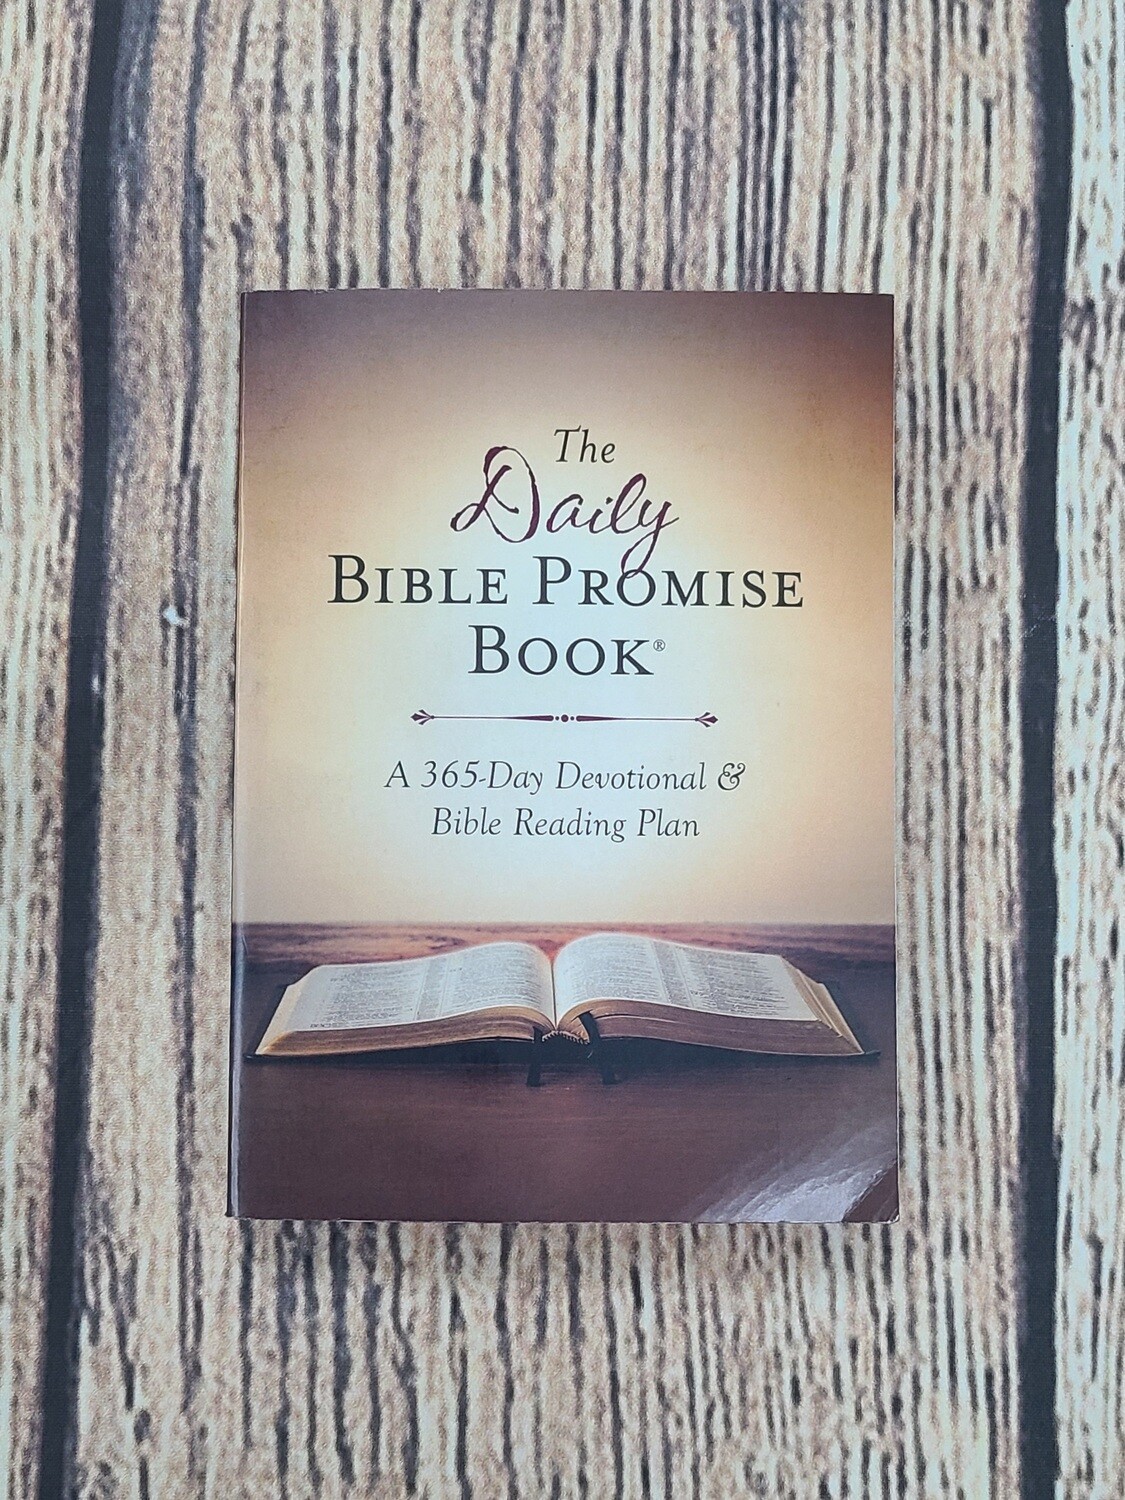 The Daily Bible Promise Book: A 365-Day Devotional and Bible Reading Plan by Barbour Publishing - Great Condition